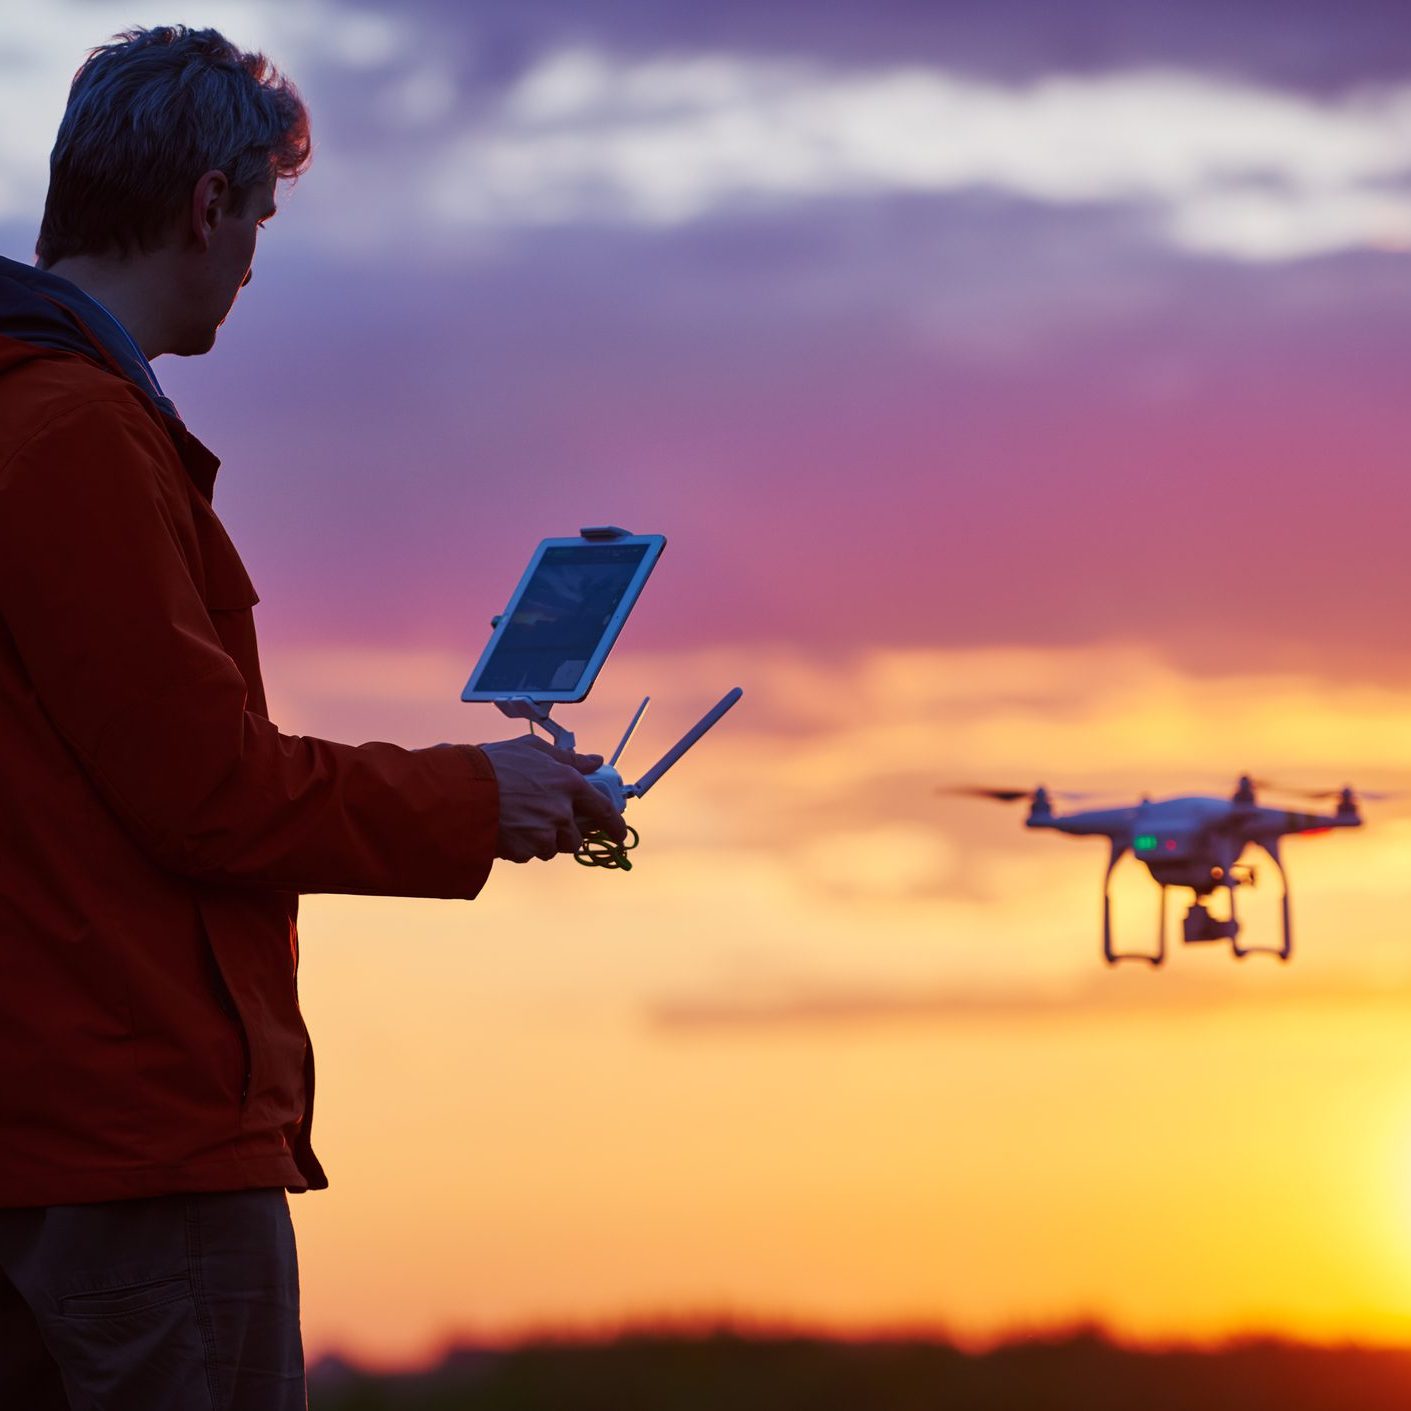 Man Flying Drone at Sunset